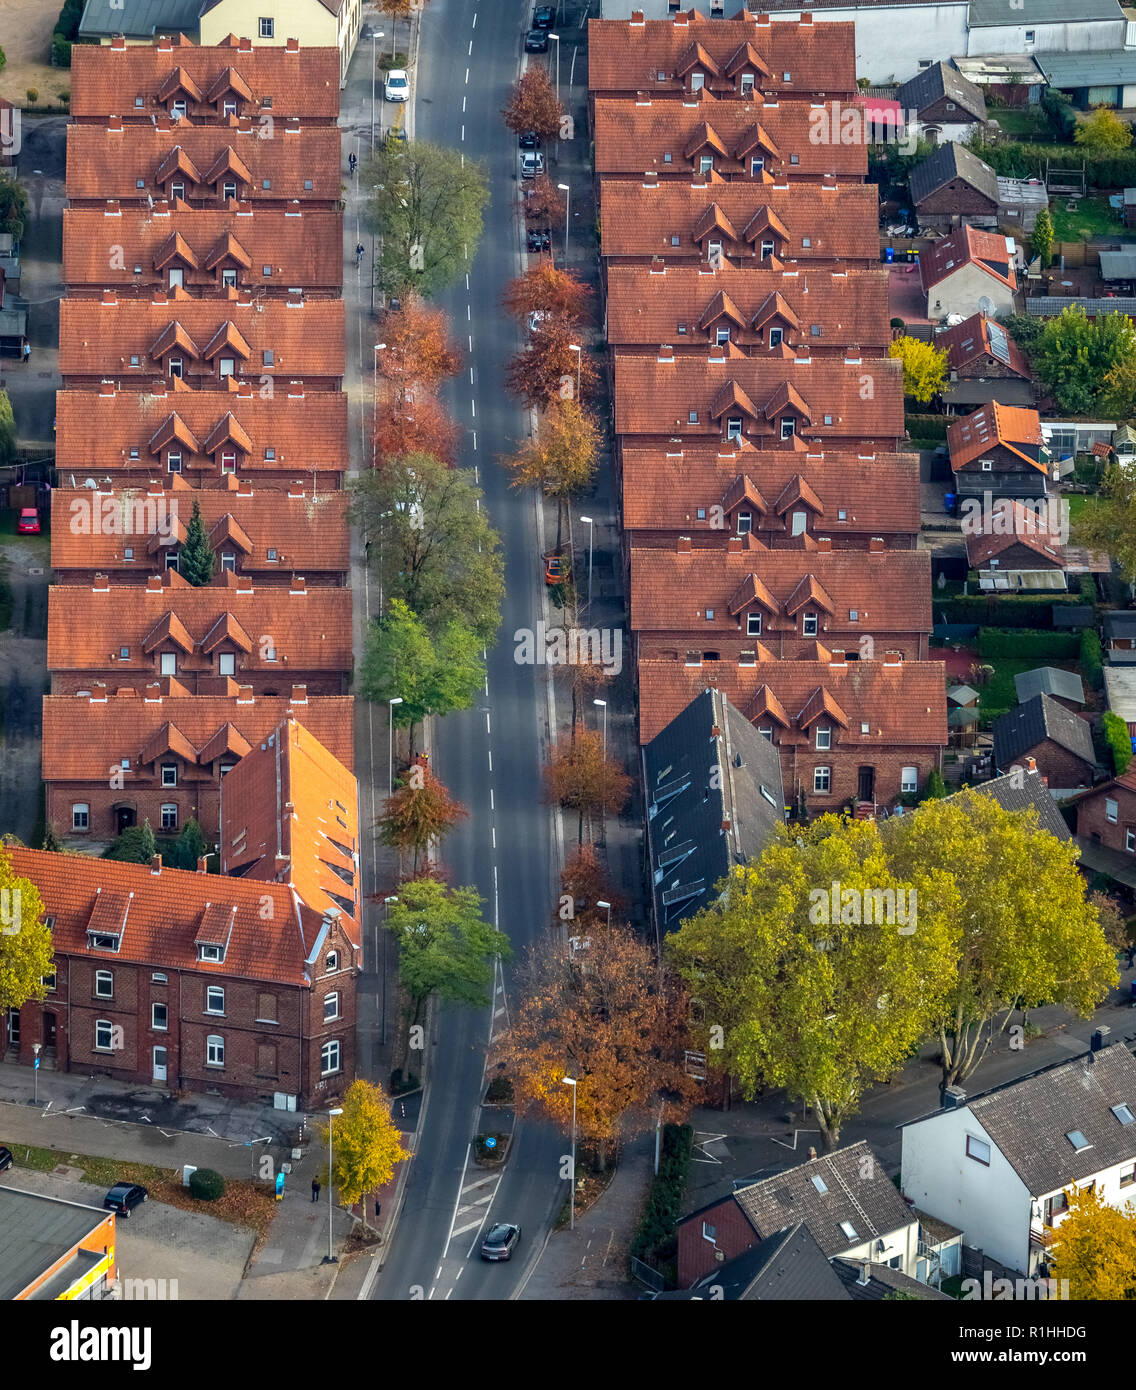 Aerial View, miners houses, red roof tiles, mining camp, uniform houses, Kirchheller road, red roof tiles, Gladbeck, Ruhr, Nordrhein-Westfalen, German Stock Photo